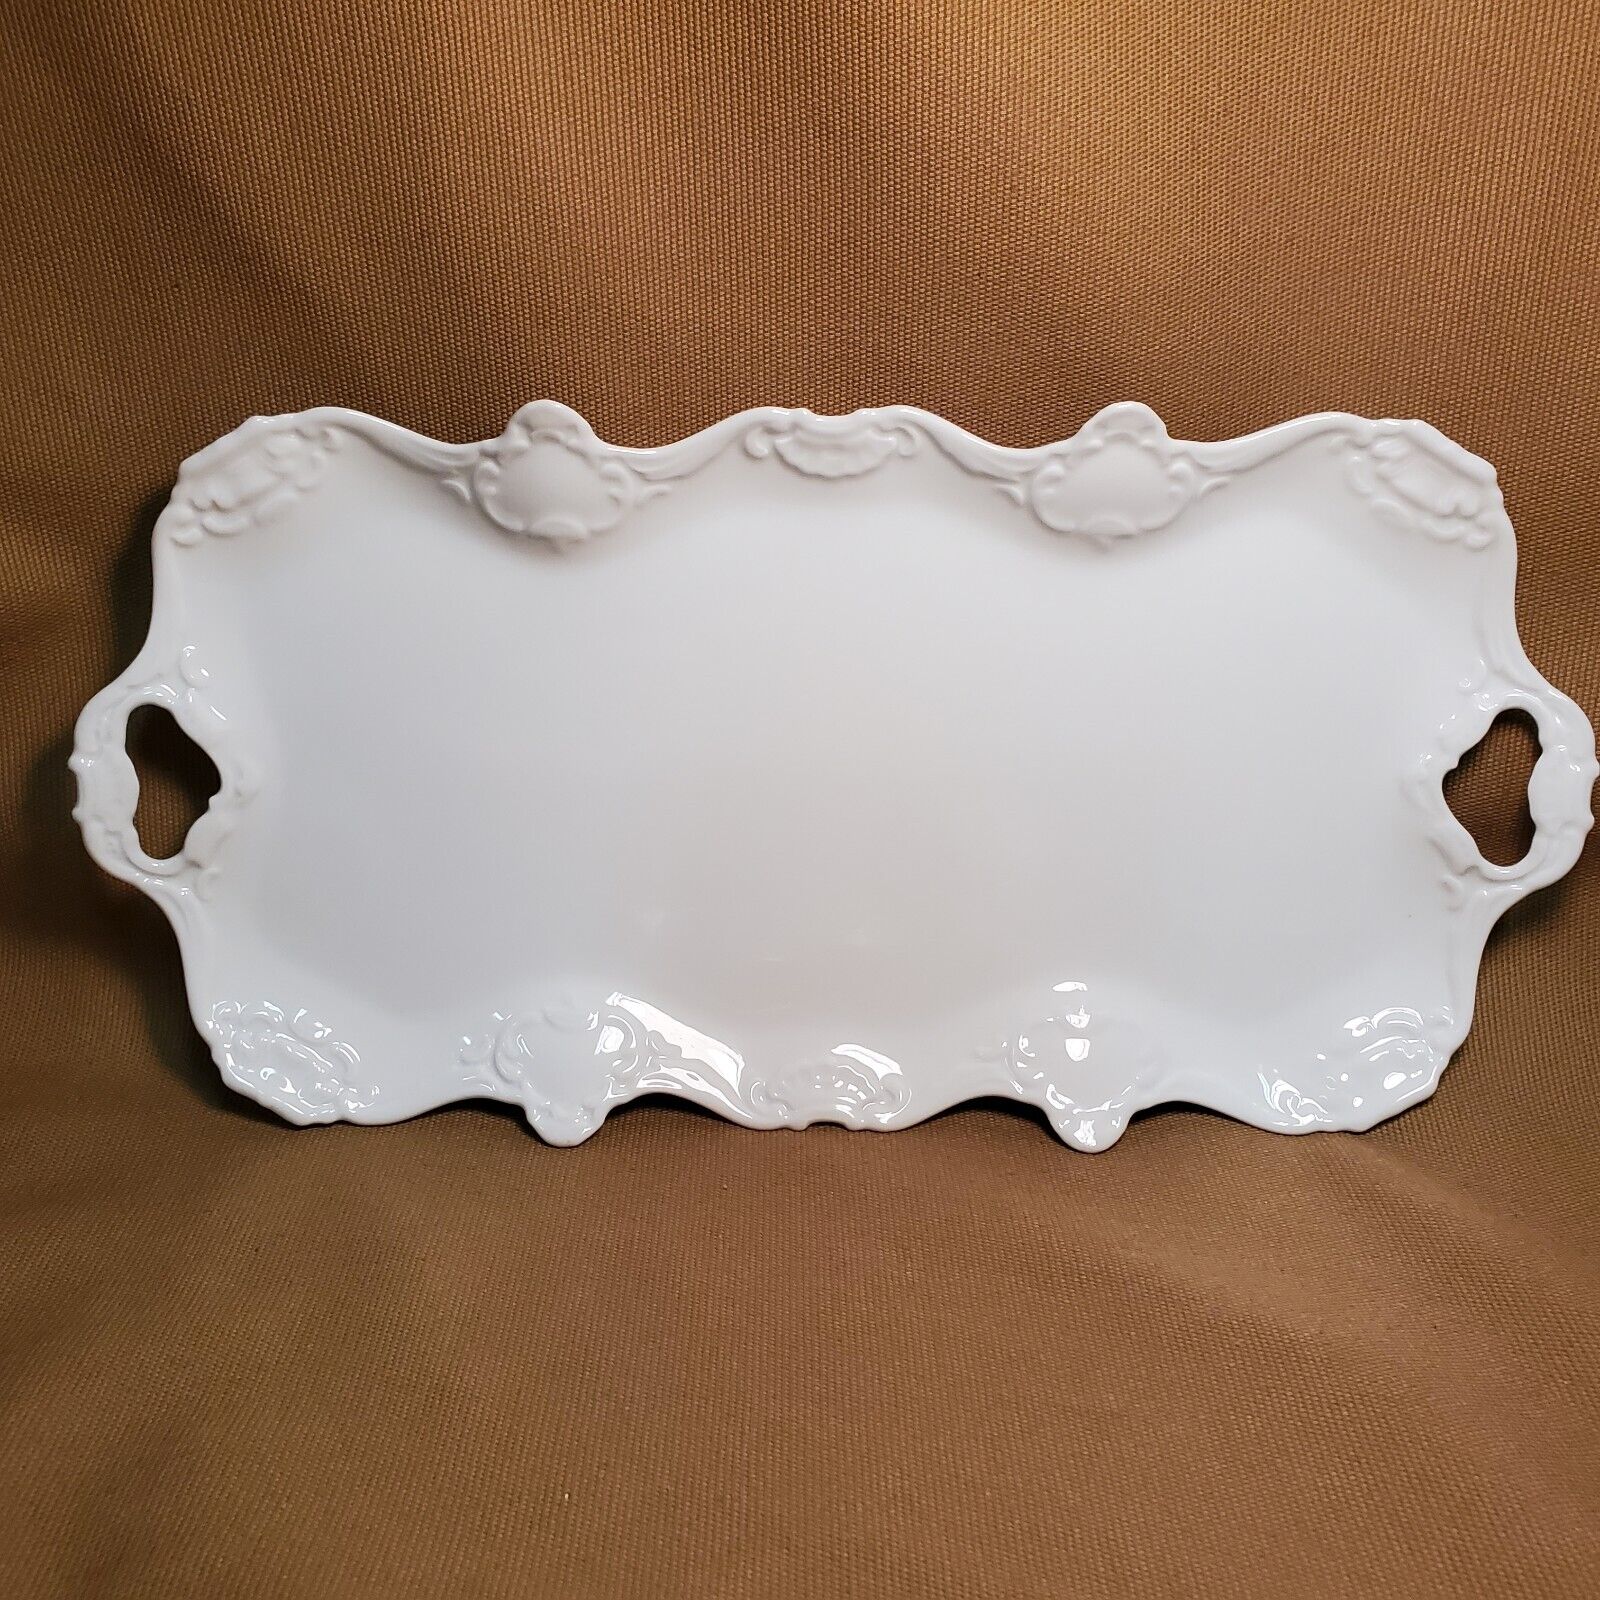 Kaiser White Porcelain -Serving Tray Platter Embossed 15.75” Excellent Used Cond